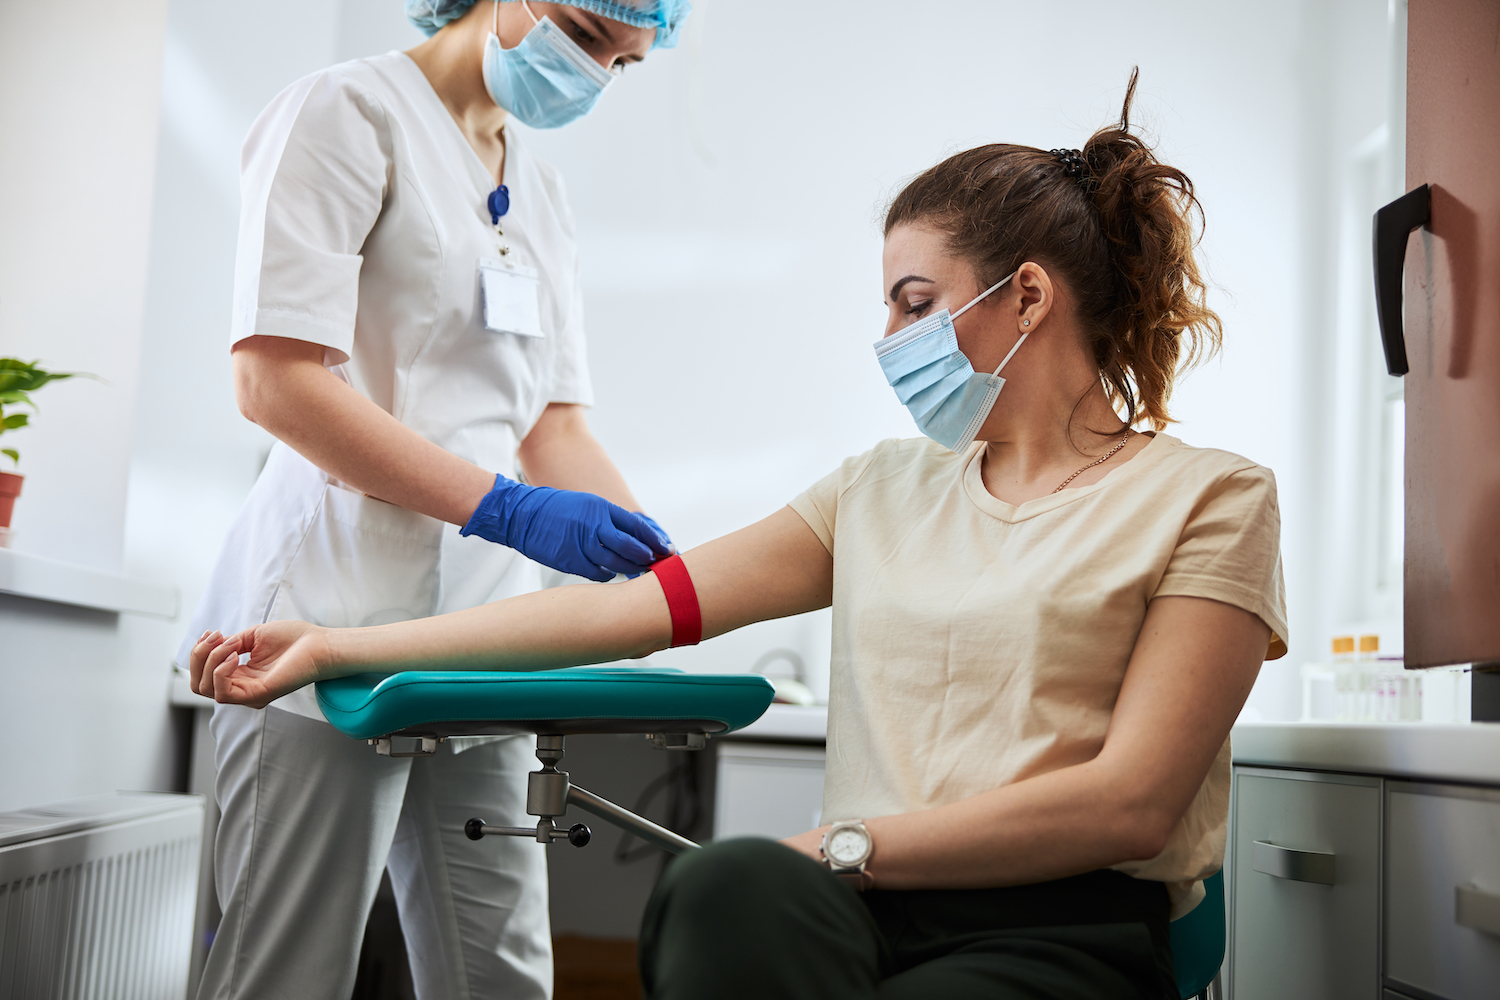 Nurse preparing to draw blood from patient arm